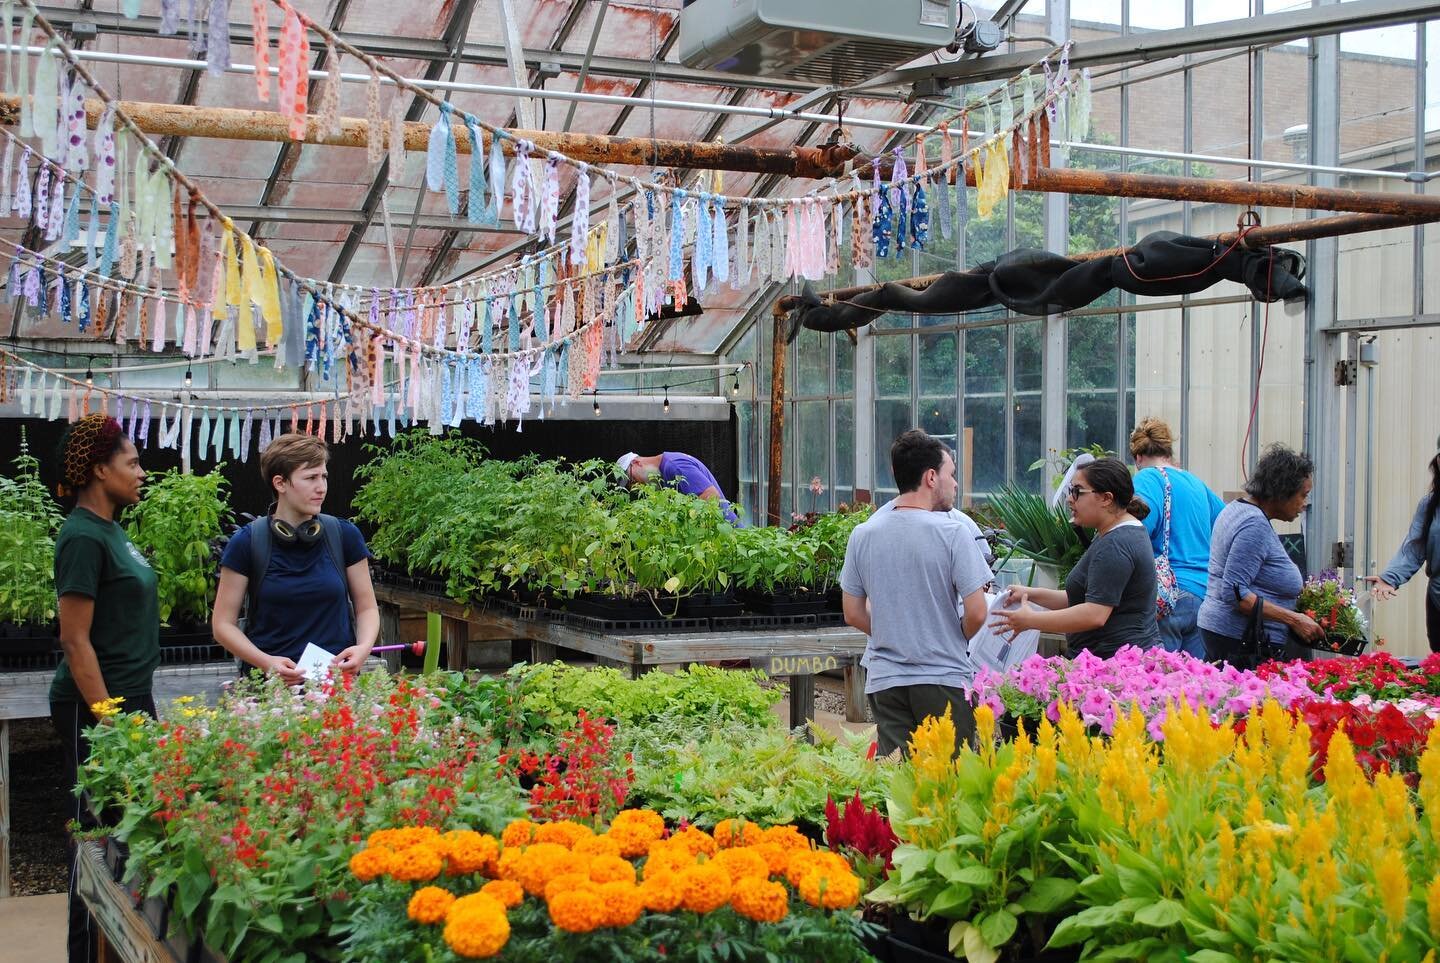 Come one, come all to our Spring Plant Fair! Thursday, April 20 from 5&ndash;7 PM in the Plantery behind the SFA Agriculture building. We will have plenty of great student grown plants available.